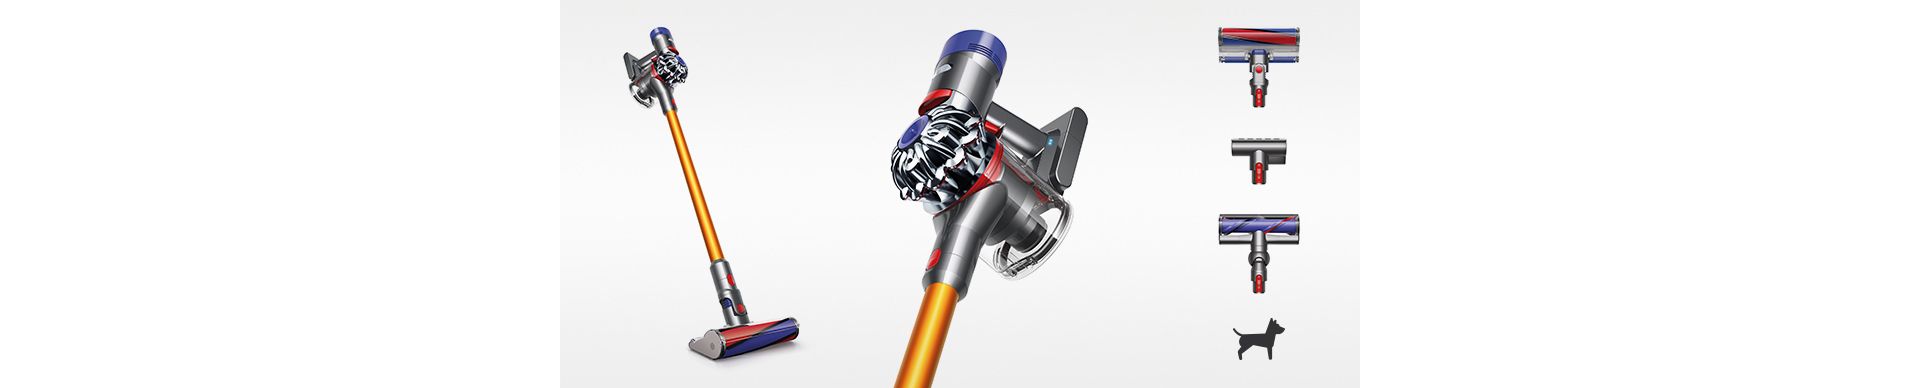 Image showing Dyson V8 Absolute